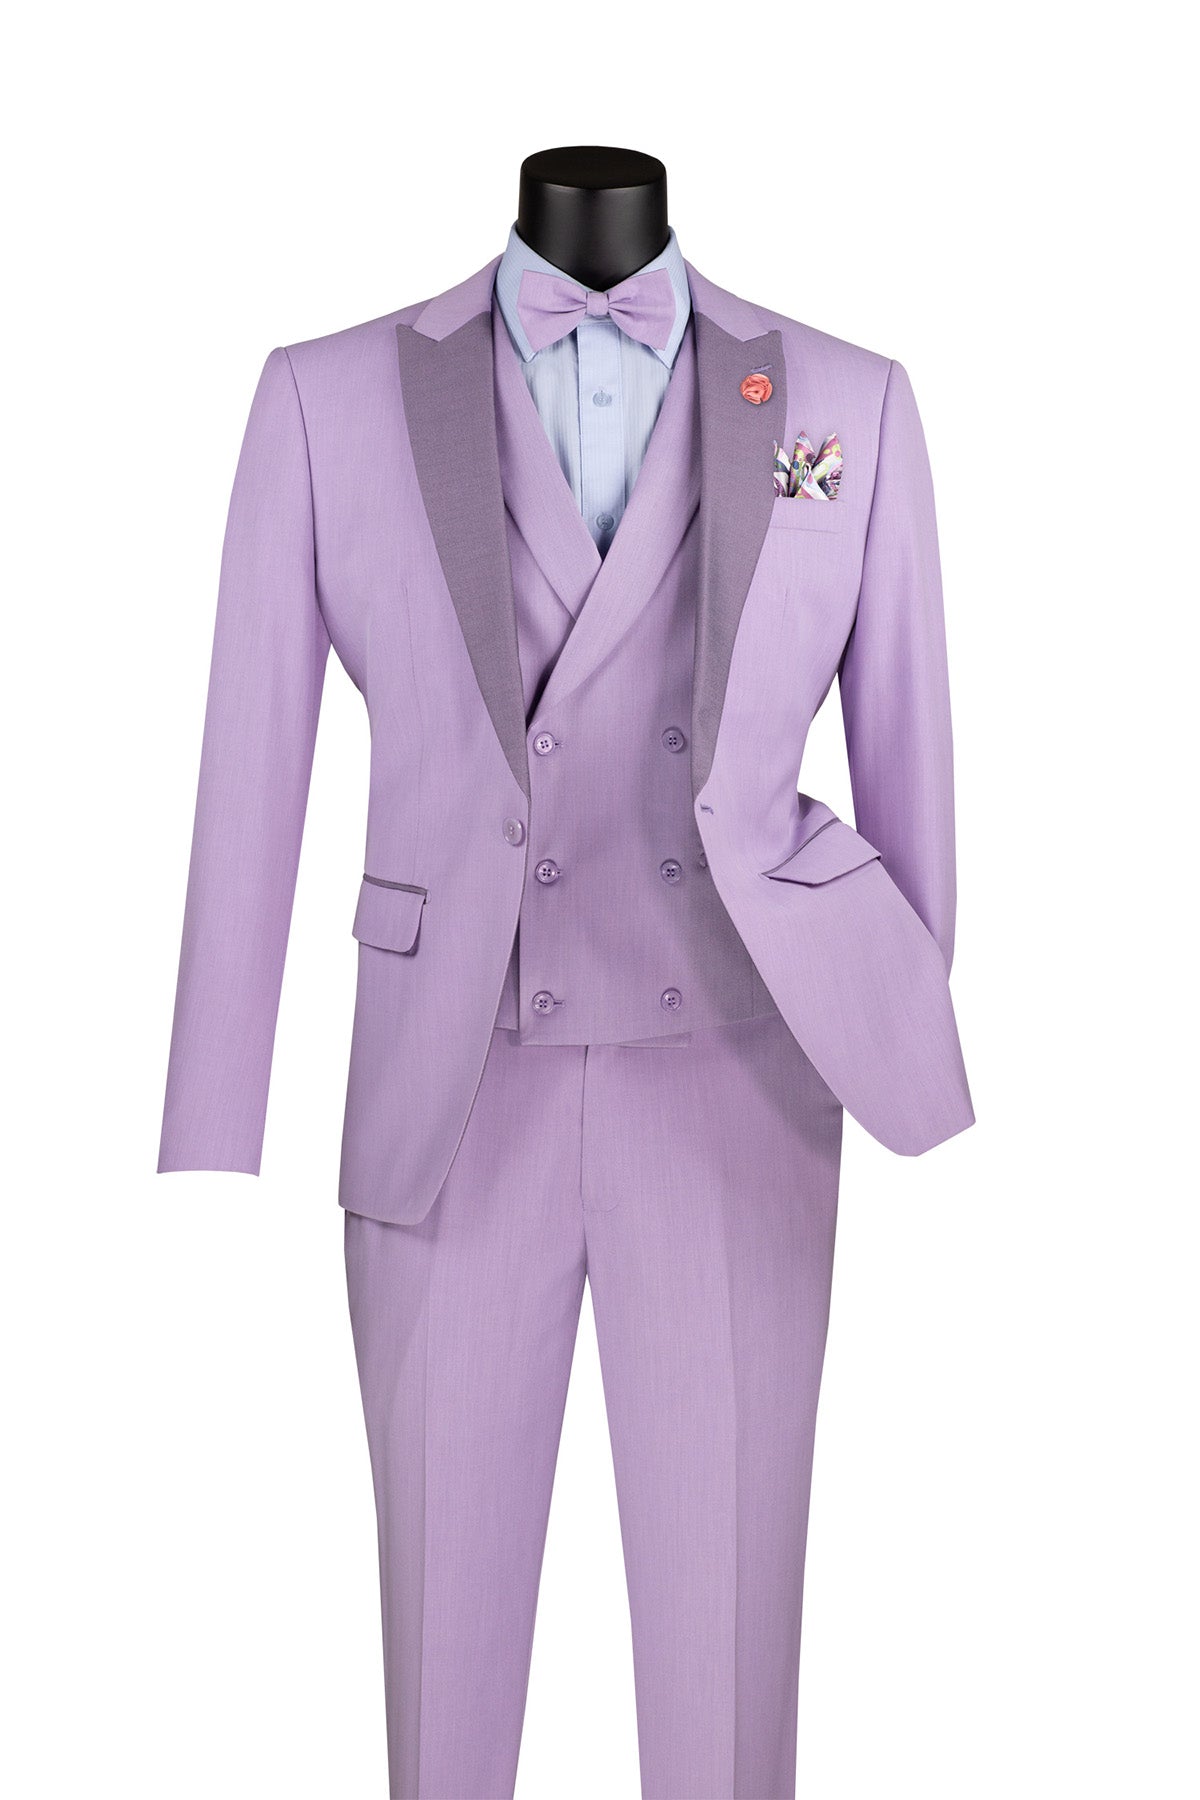 Slim Fit Tuxedo 3 Piece with Matching Bow Tie in Lavender